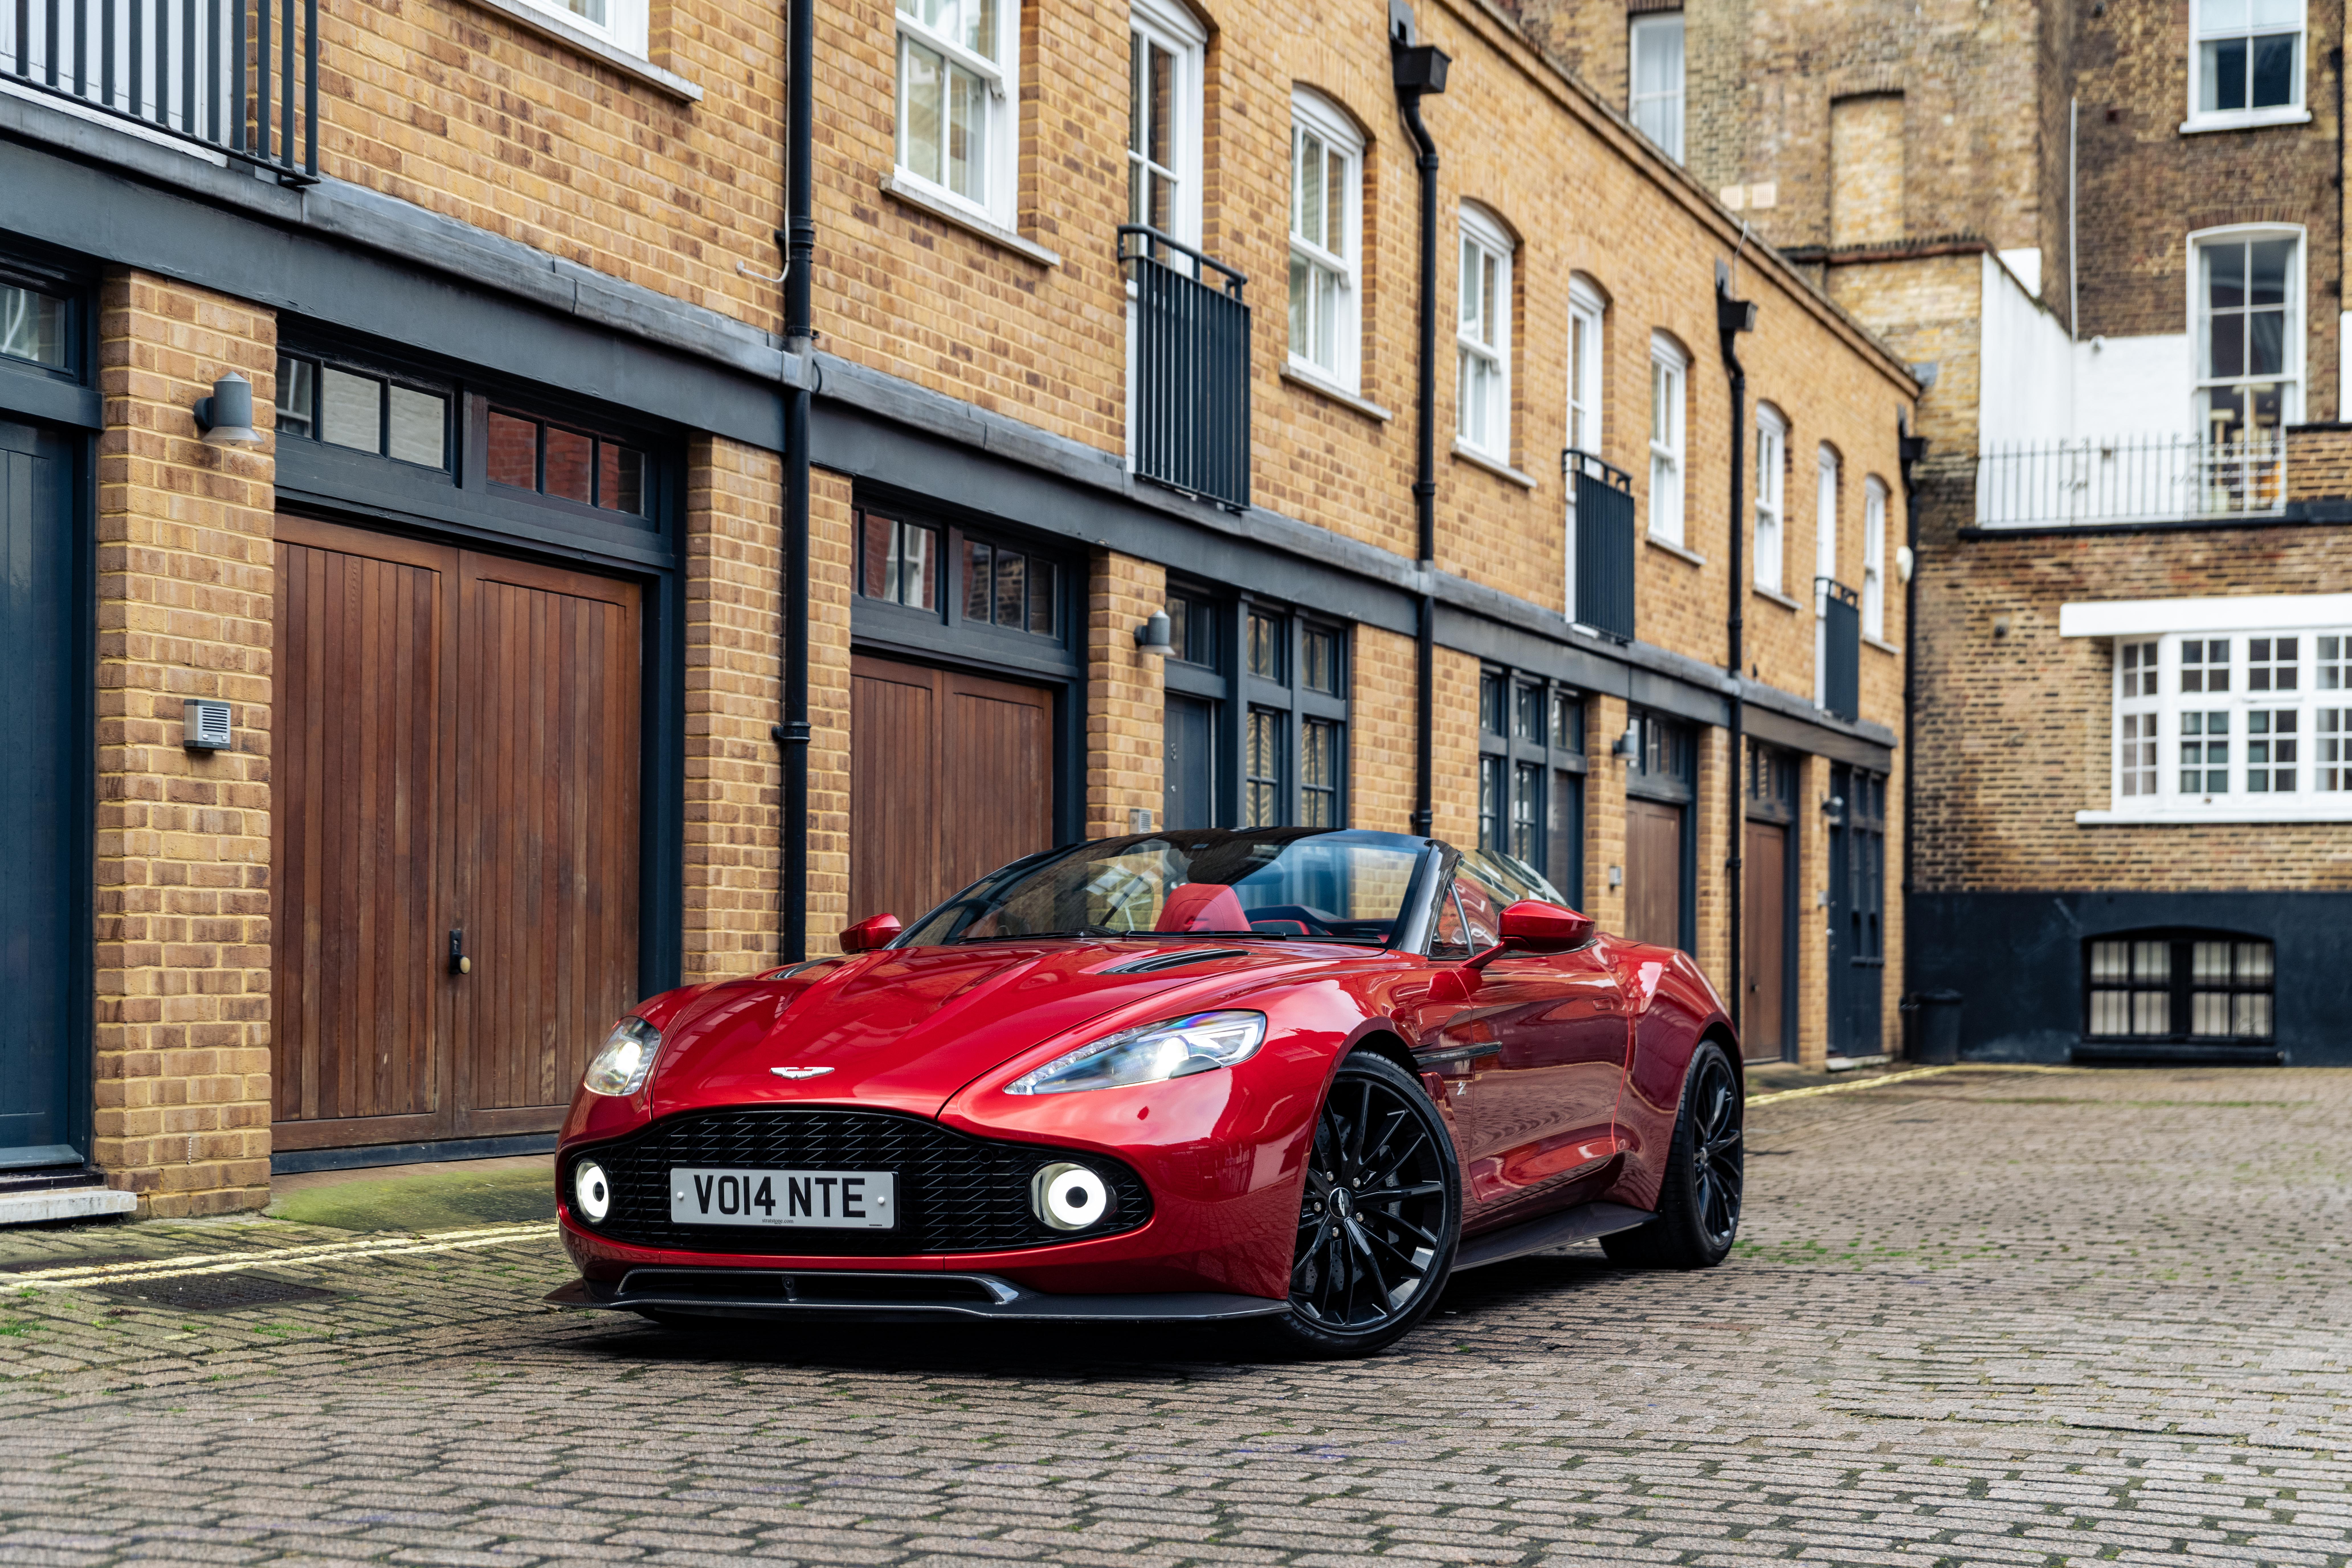 This Aston Martin Vanquish Zagato Volante is a striking and impressive example of the extremely rare and beautifully styled coach-built open-top supercar, offered with less than running-in mileage. 0